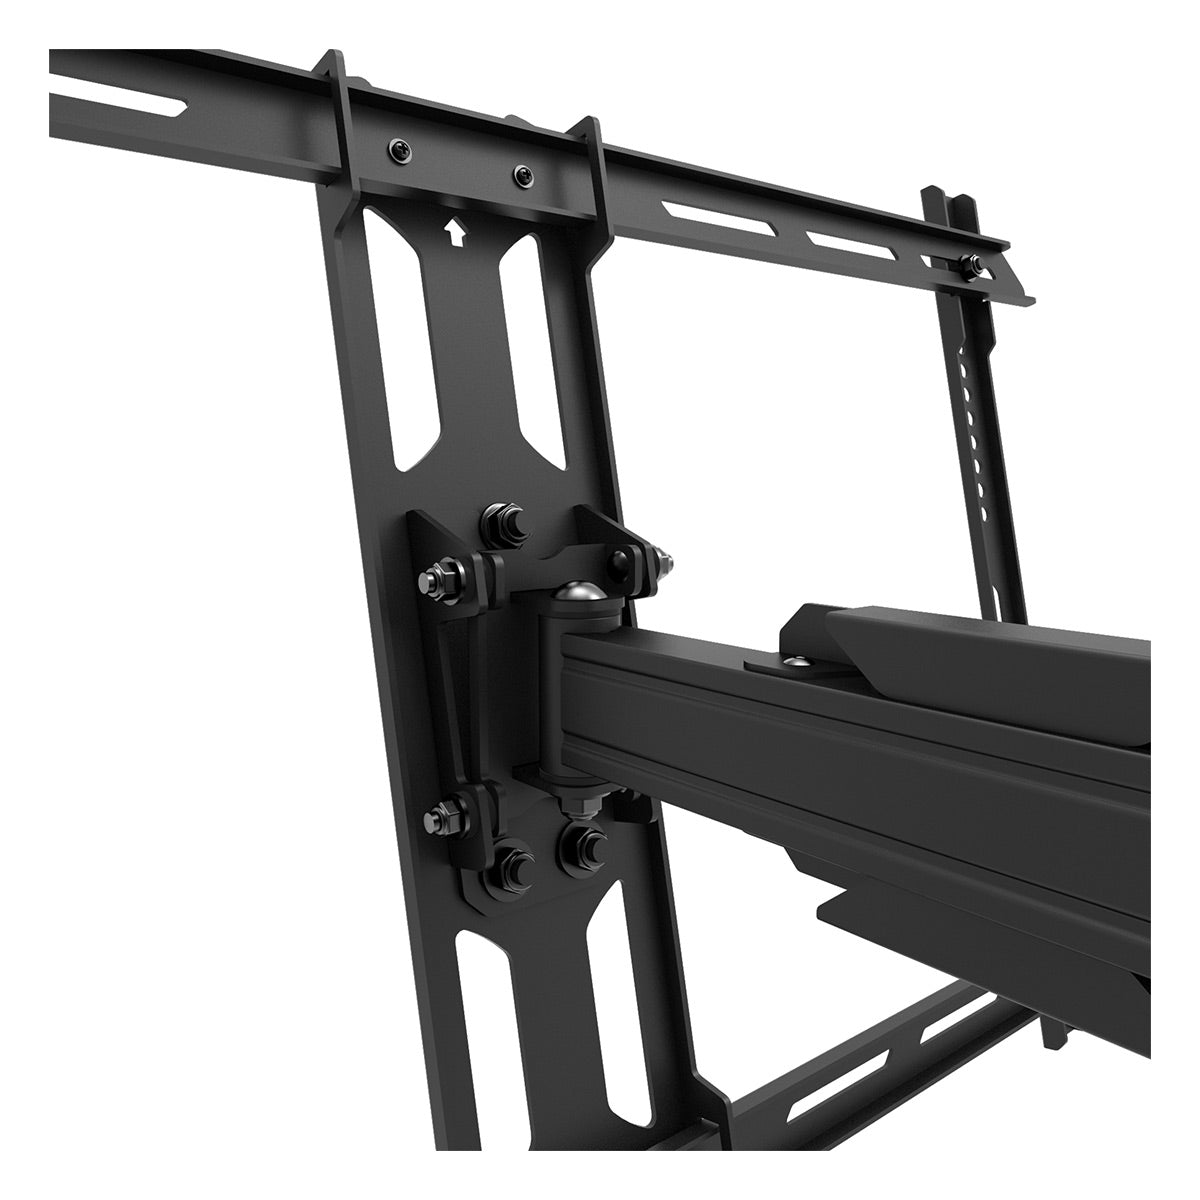 Kanto PSC350 No Drill Full-Motion Column and Pillar Wrapping TV Mount for 37" - 75" TVs